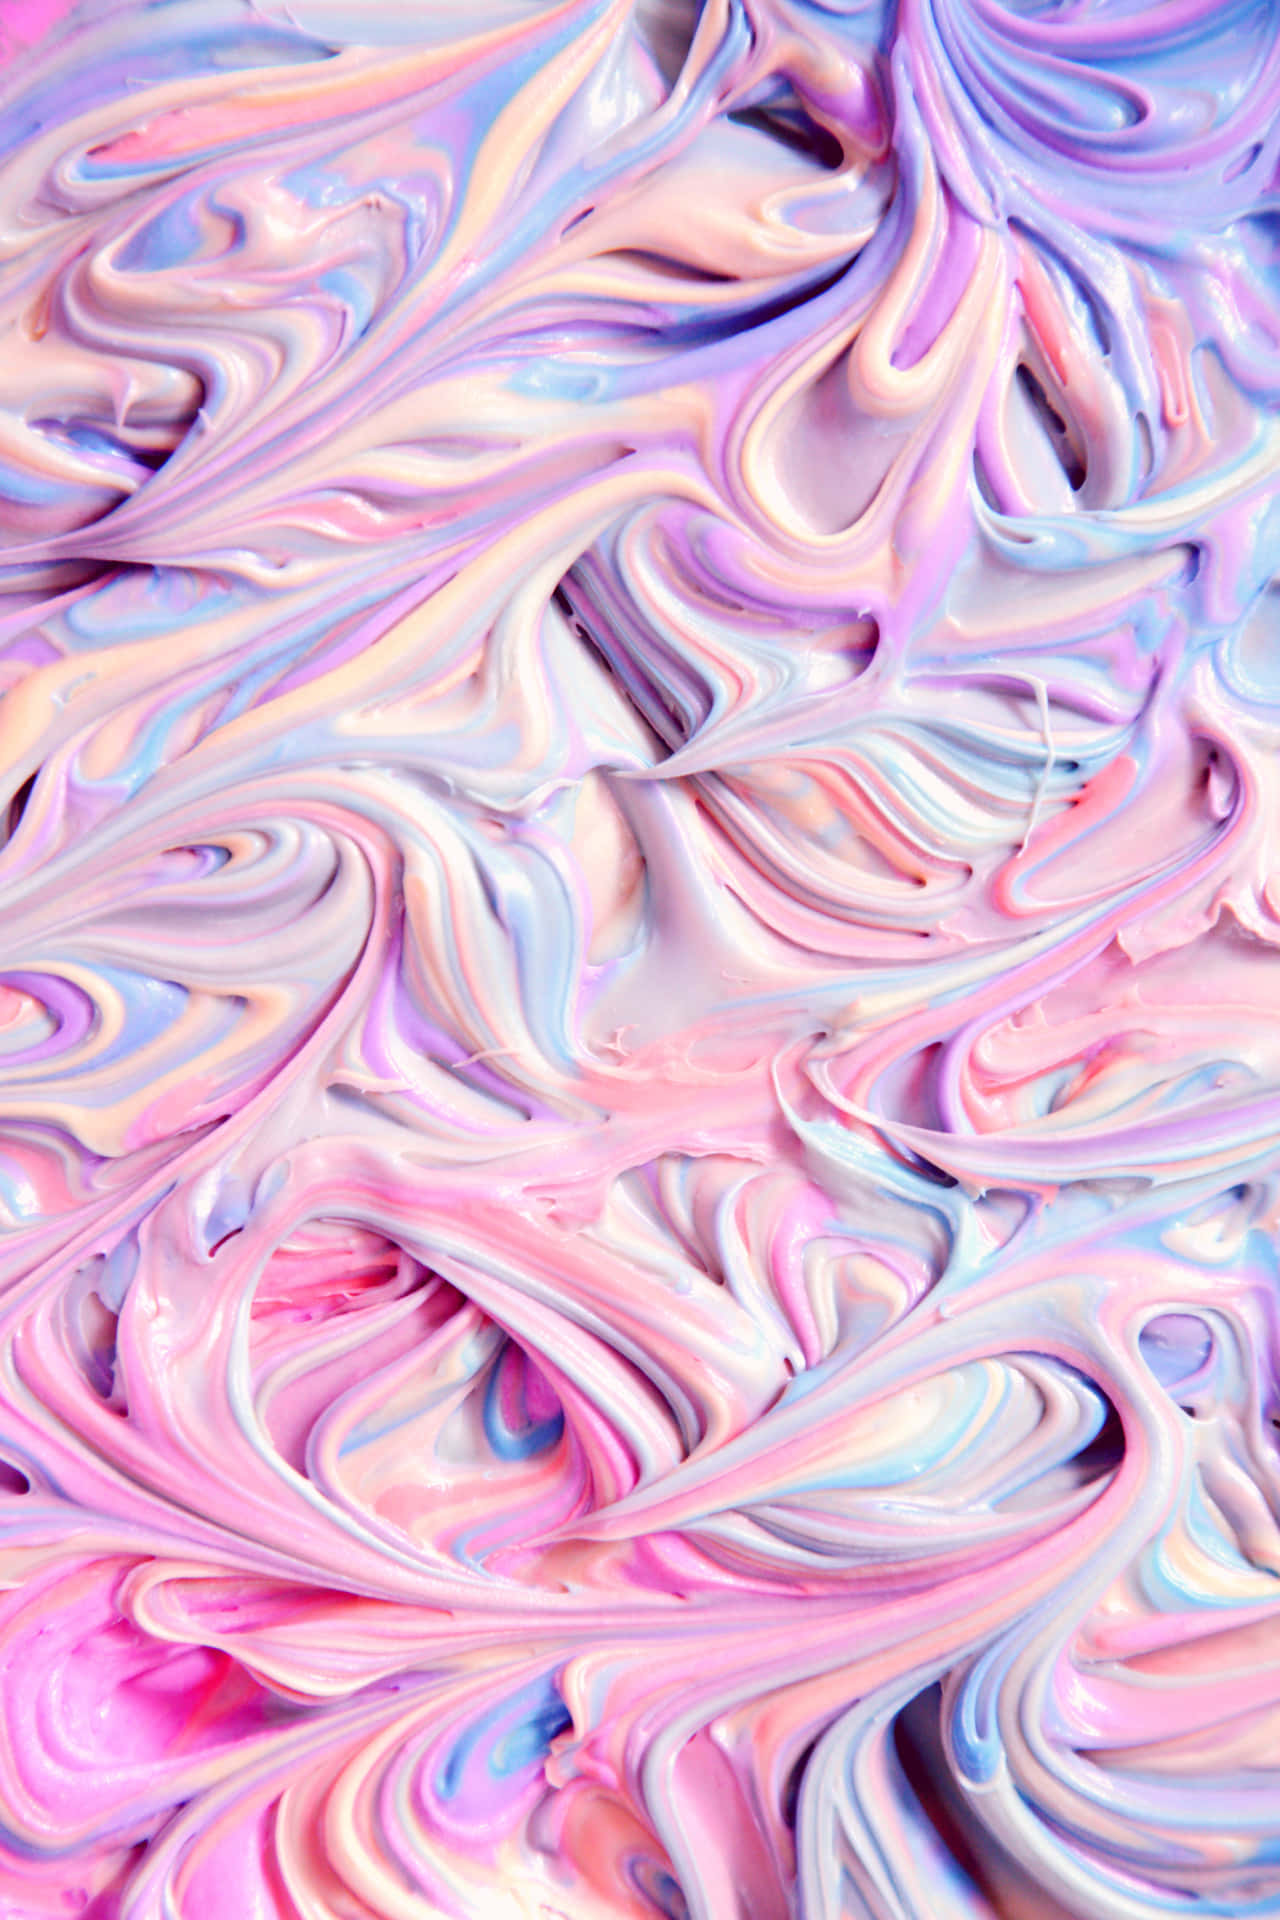 Welcome to the world of Color Pastel Aesthetics Wallpaper